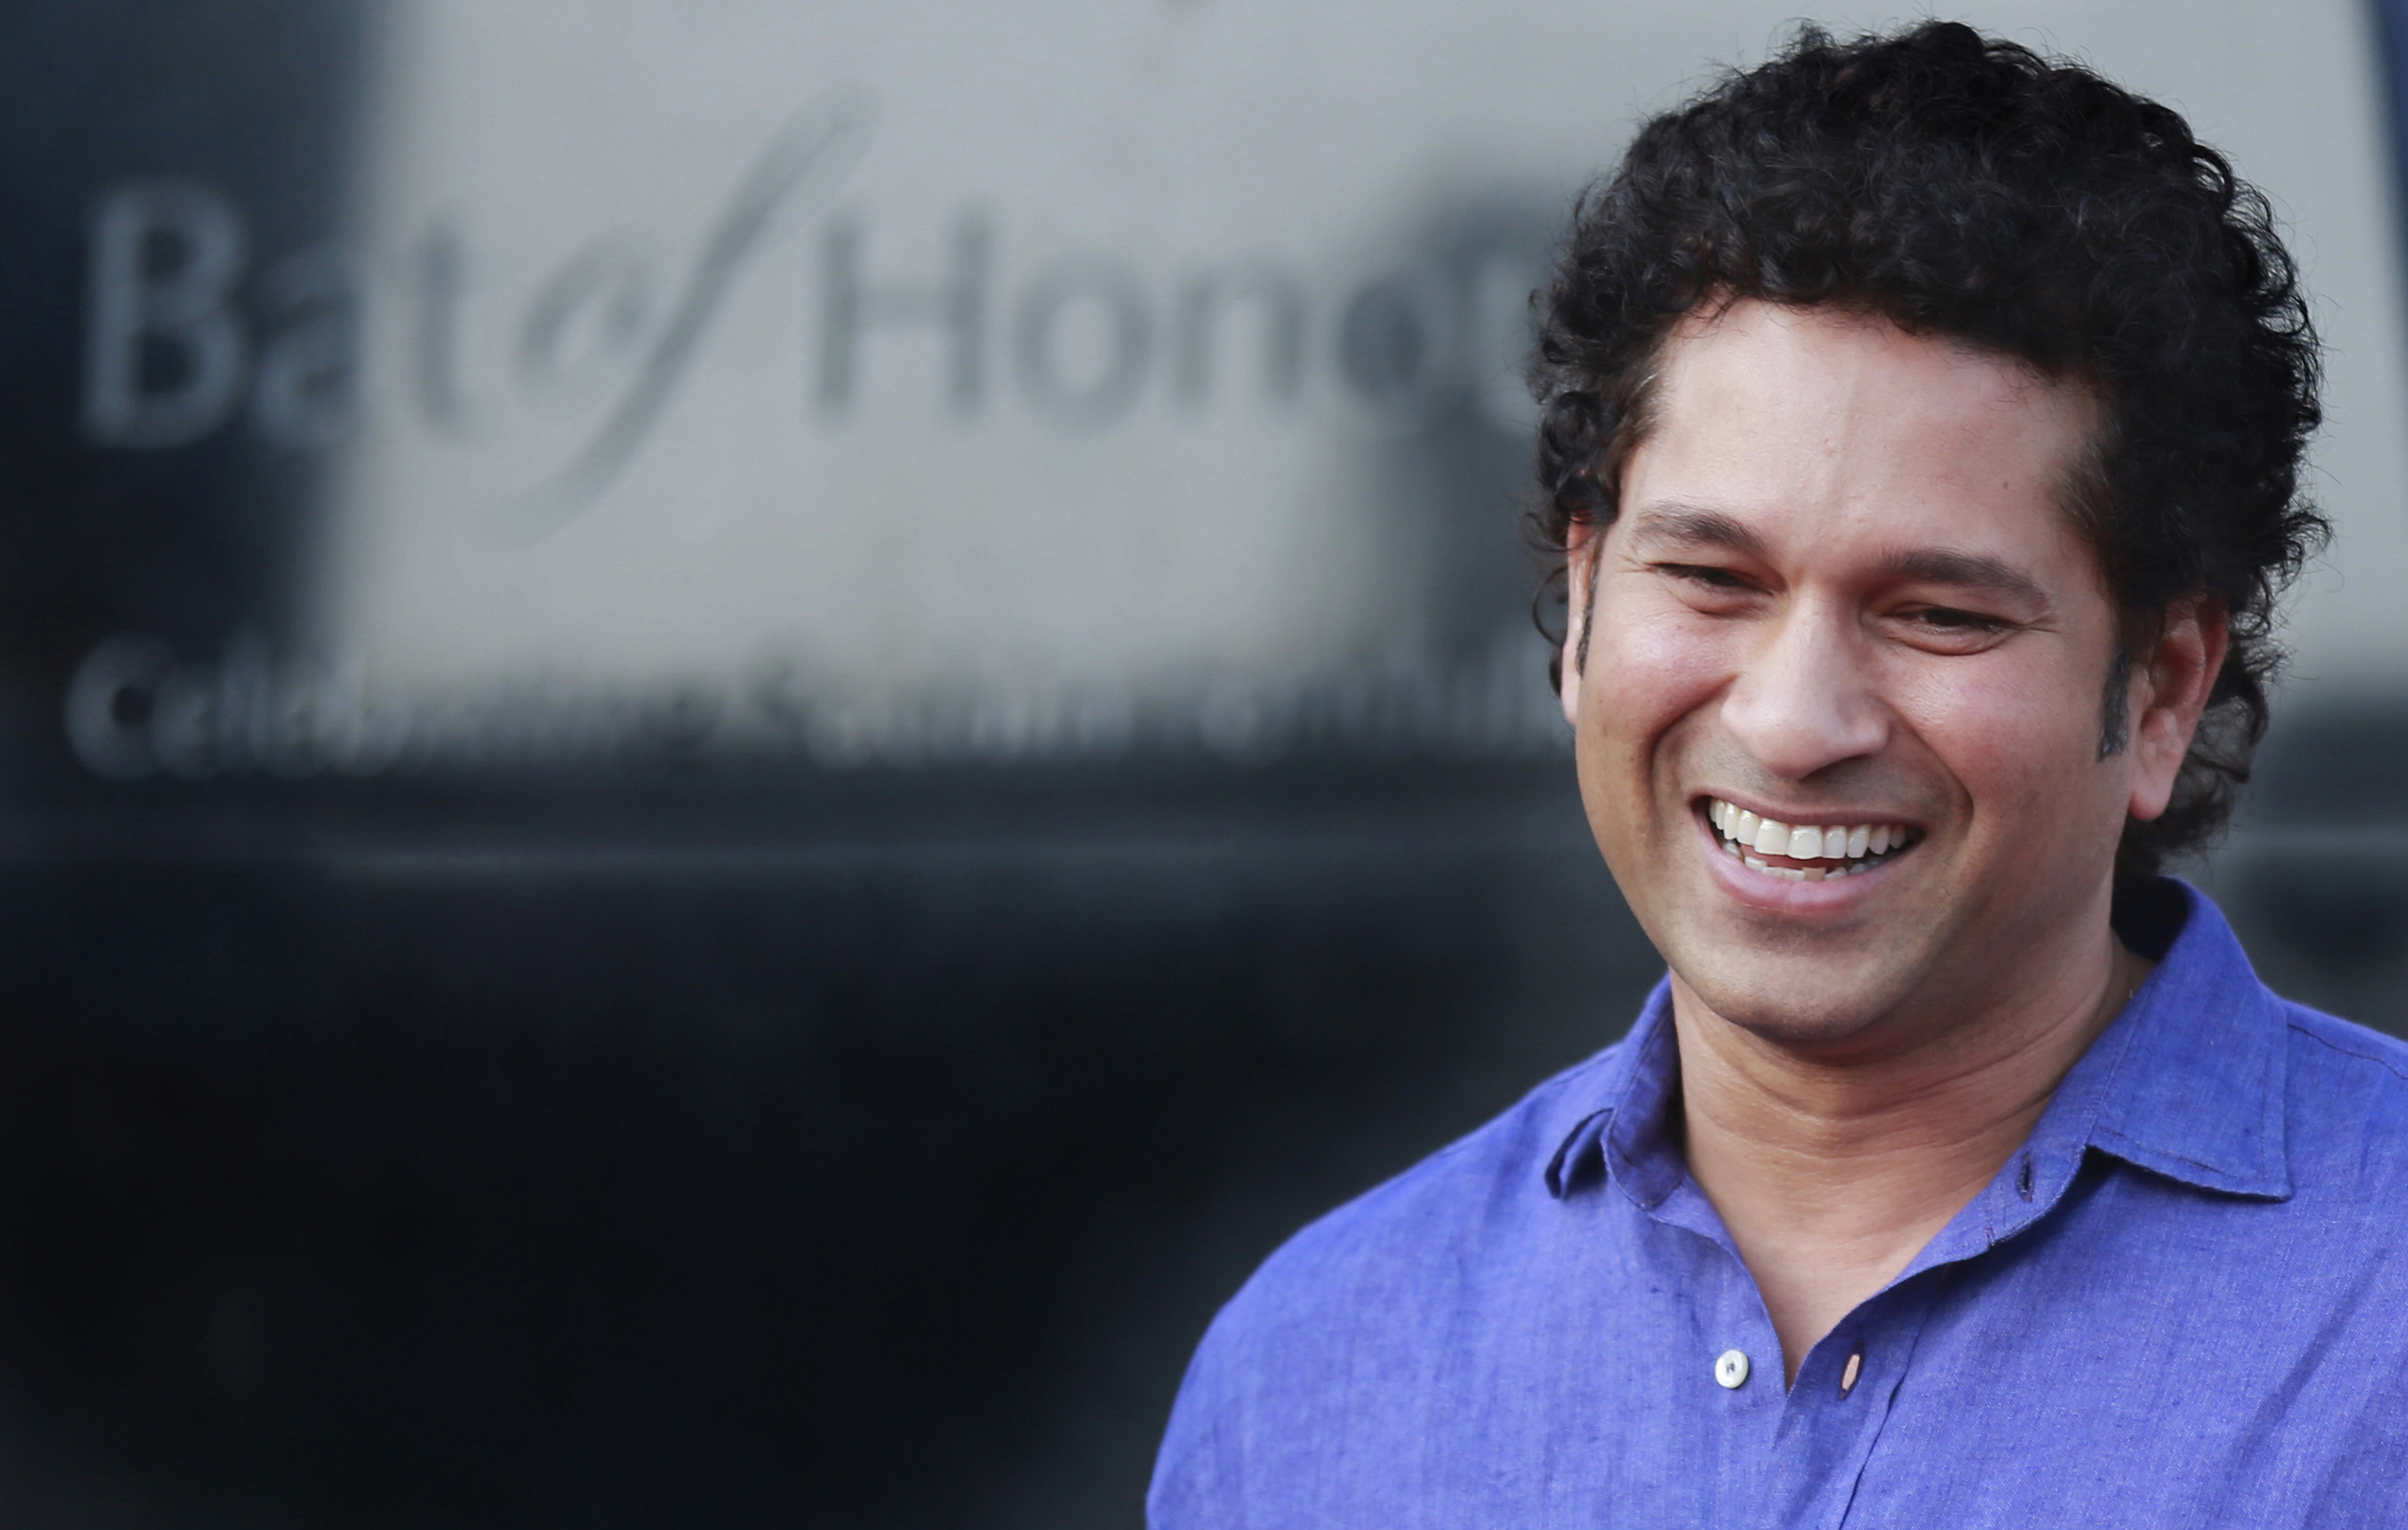 Download Sachin Tendulkar Cute Smile Face Look Mobile Hd Background Pictures Free